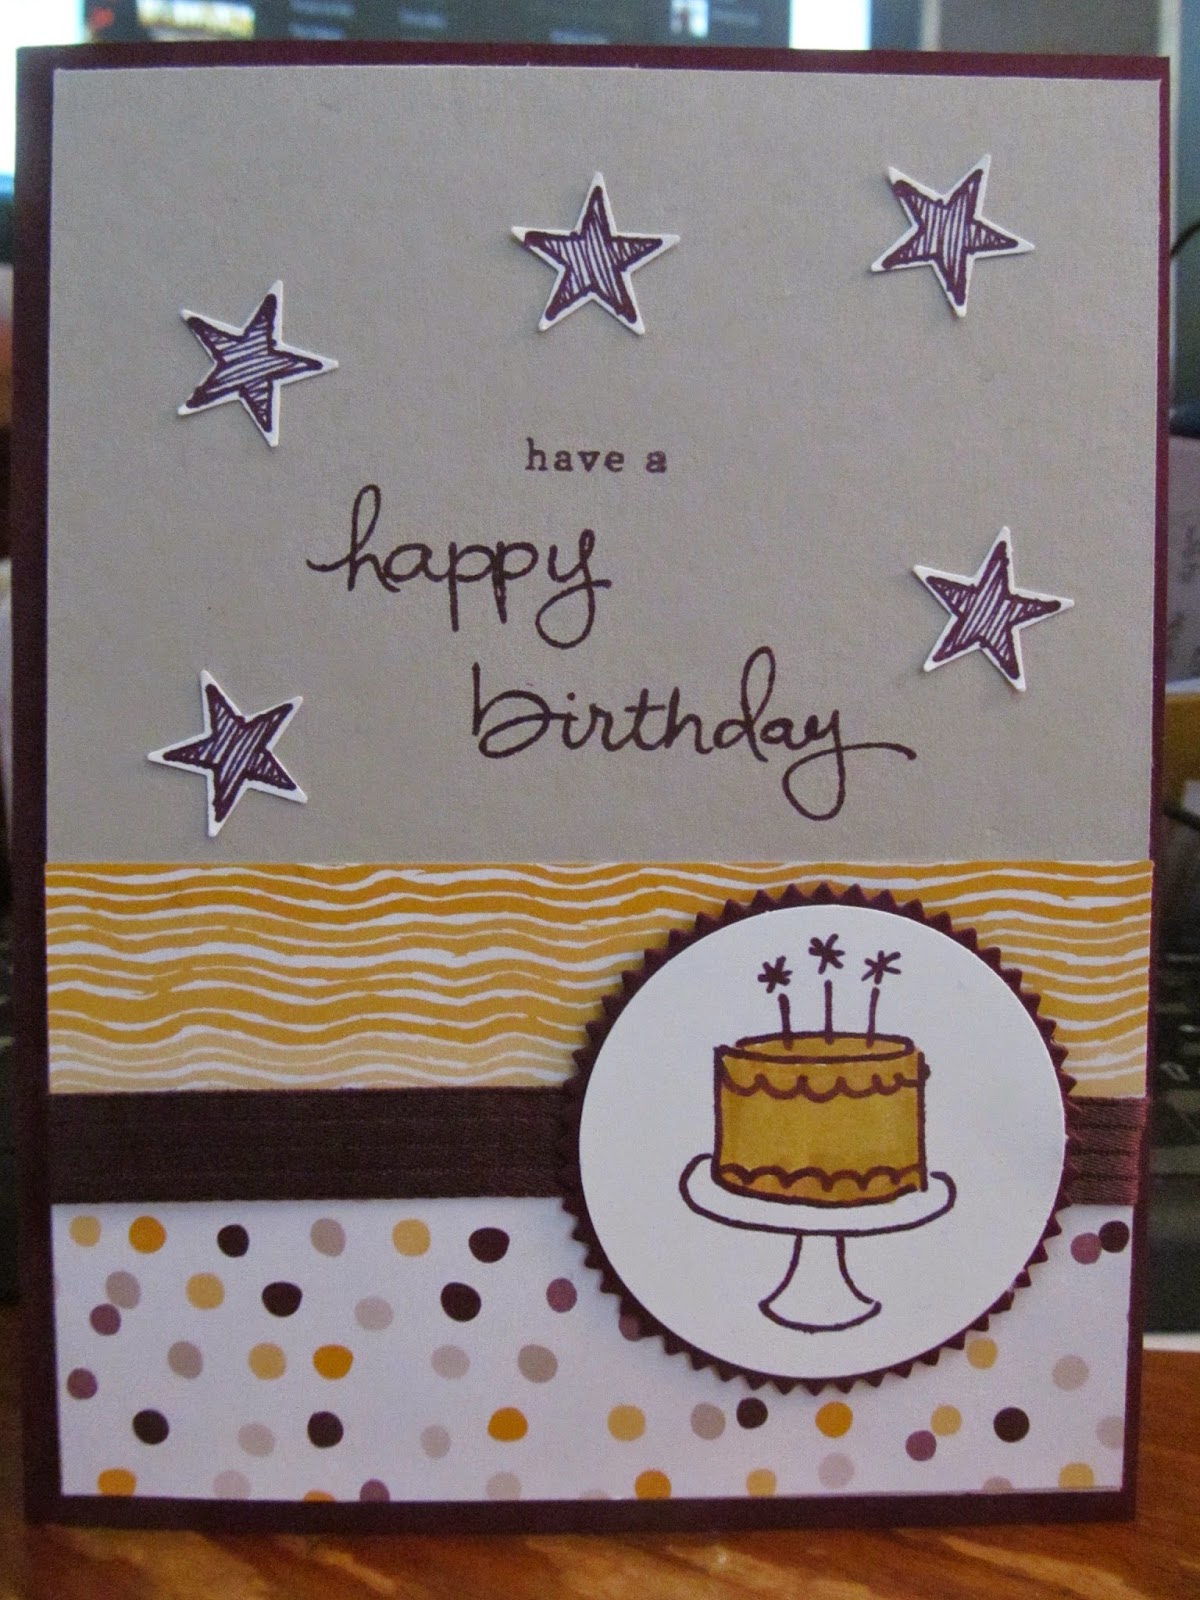 Kristin's Cards and Creations: Endless Birthday Wishes